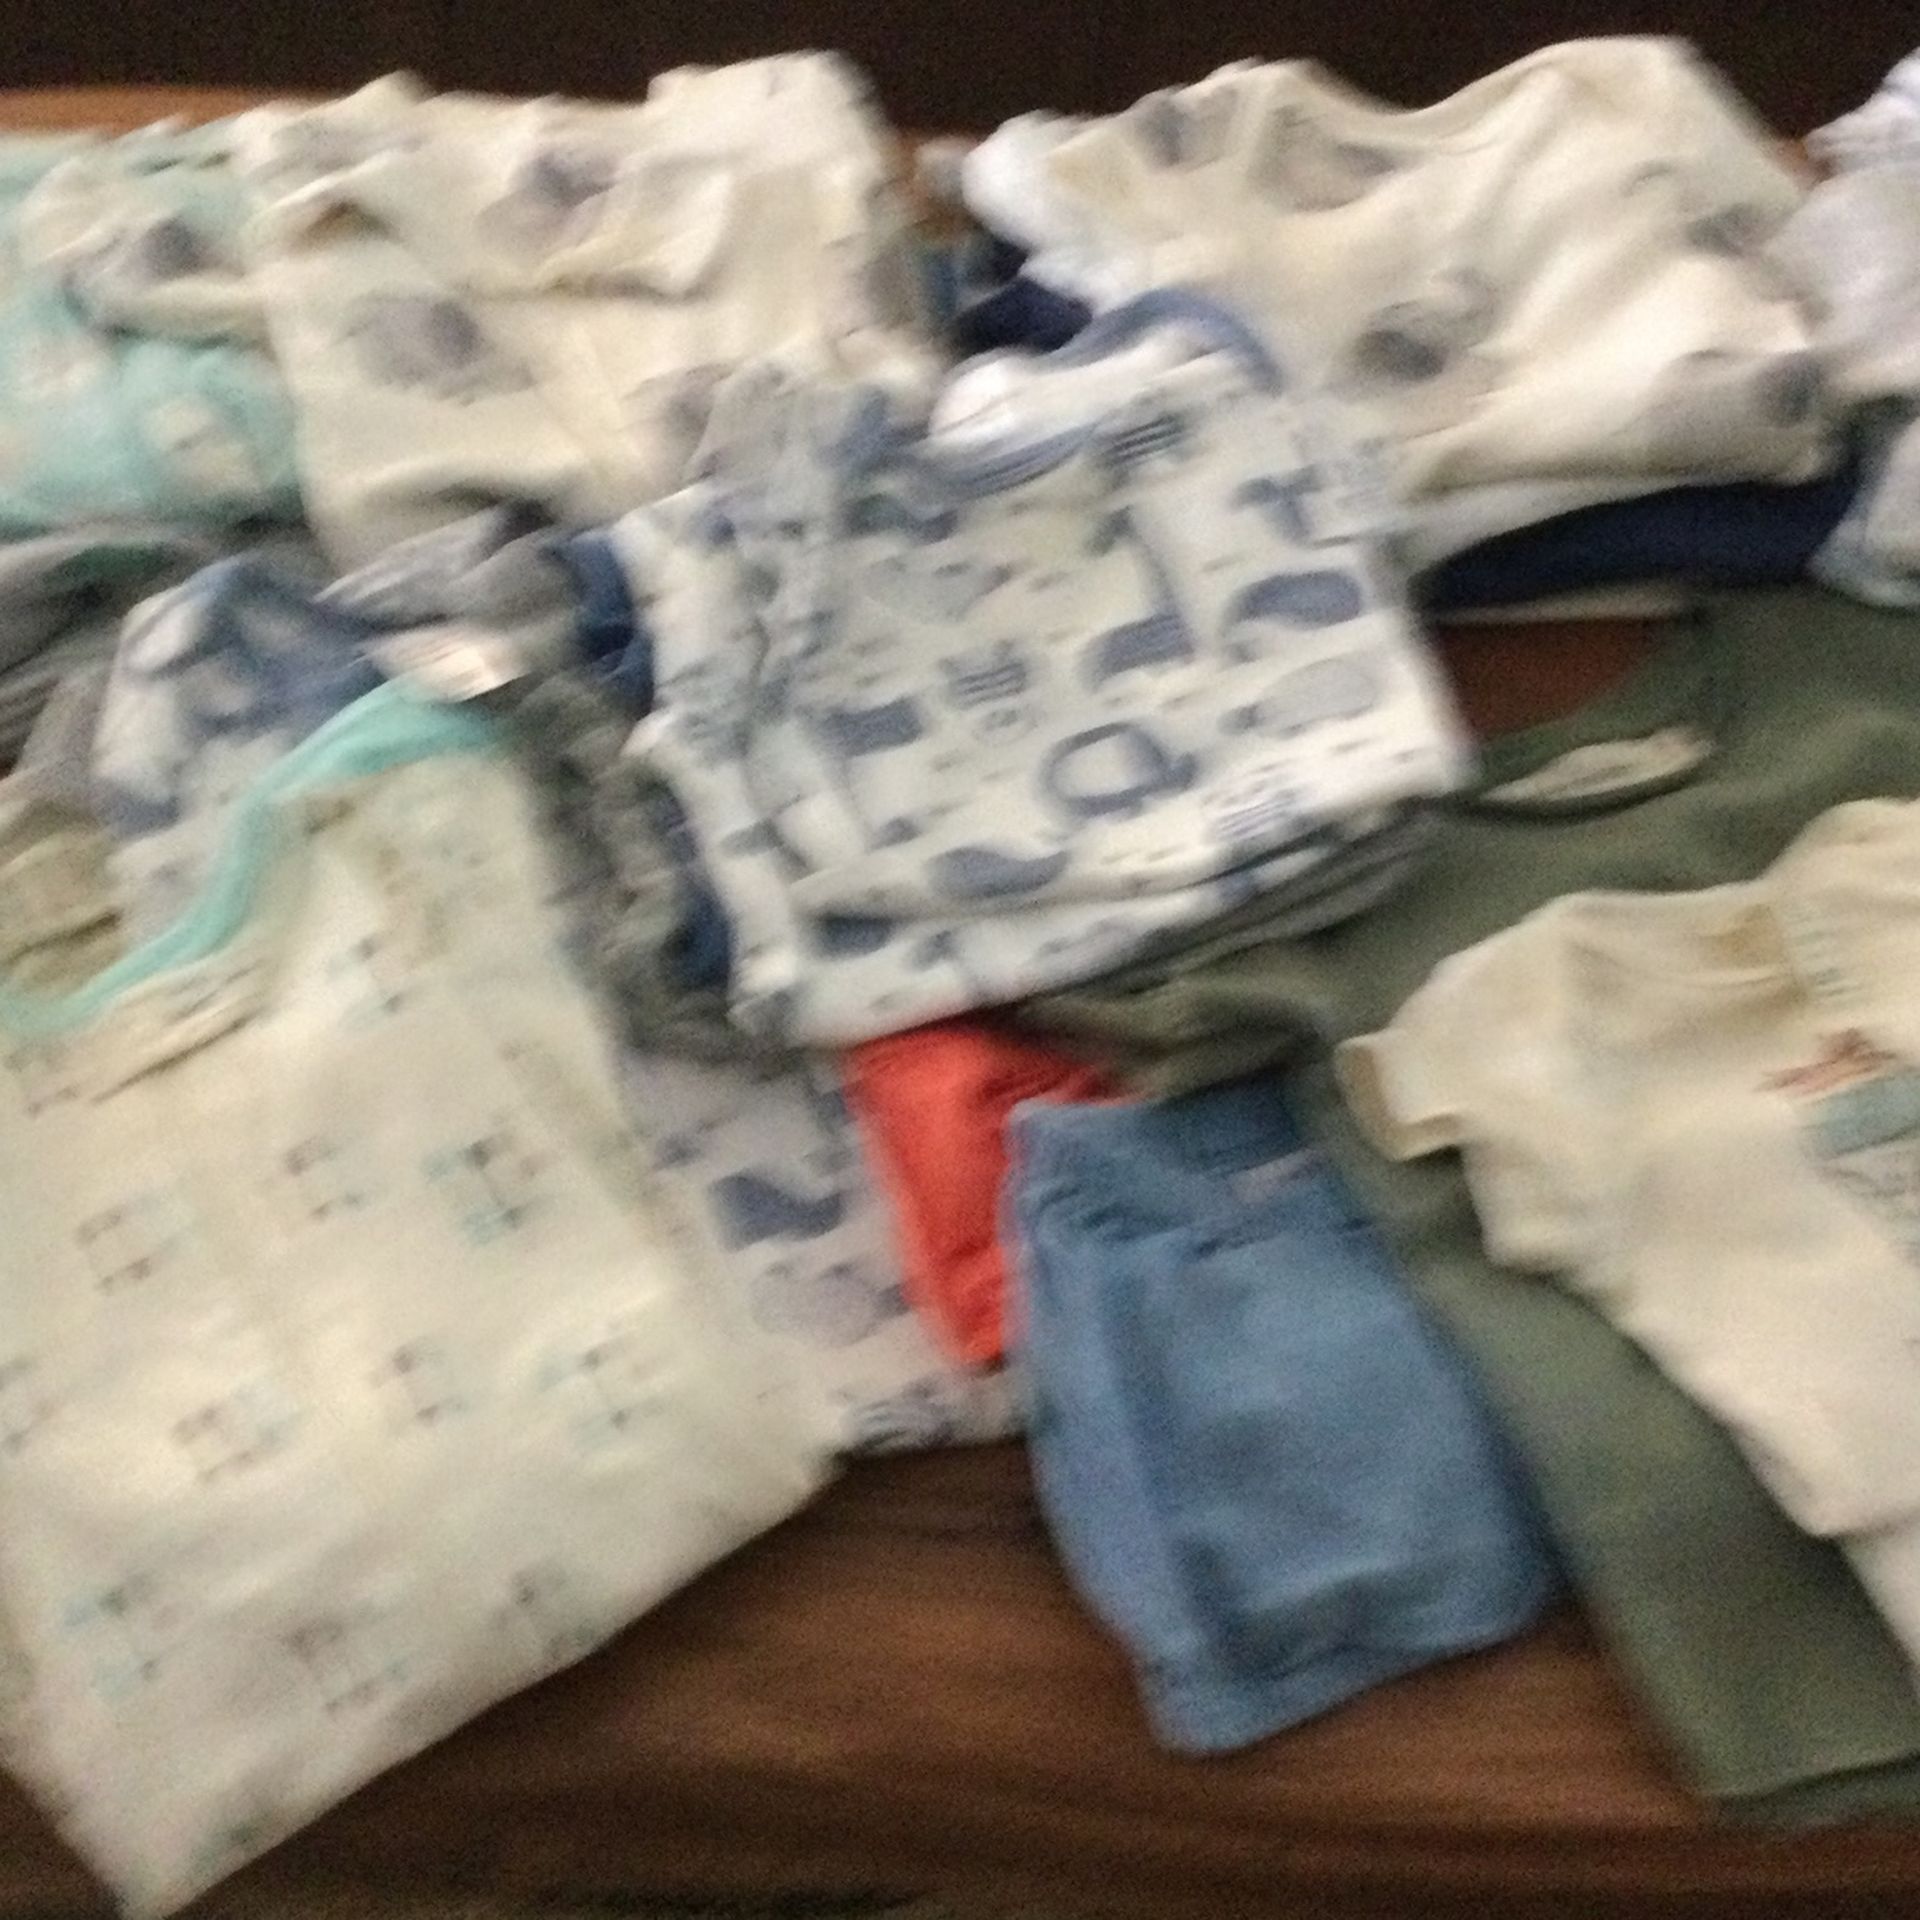 Infant  Onesies And Infant Sleepers 